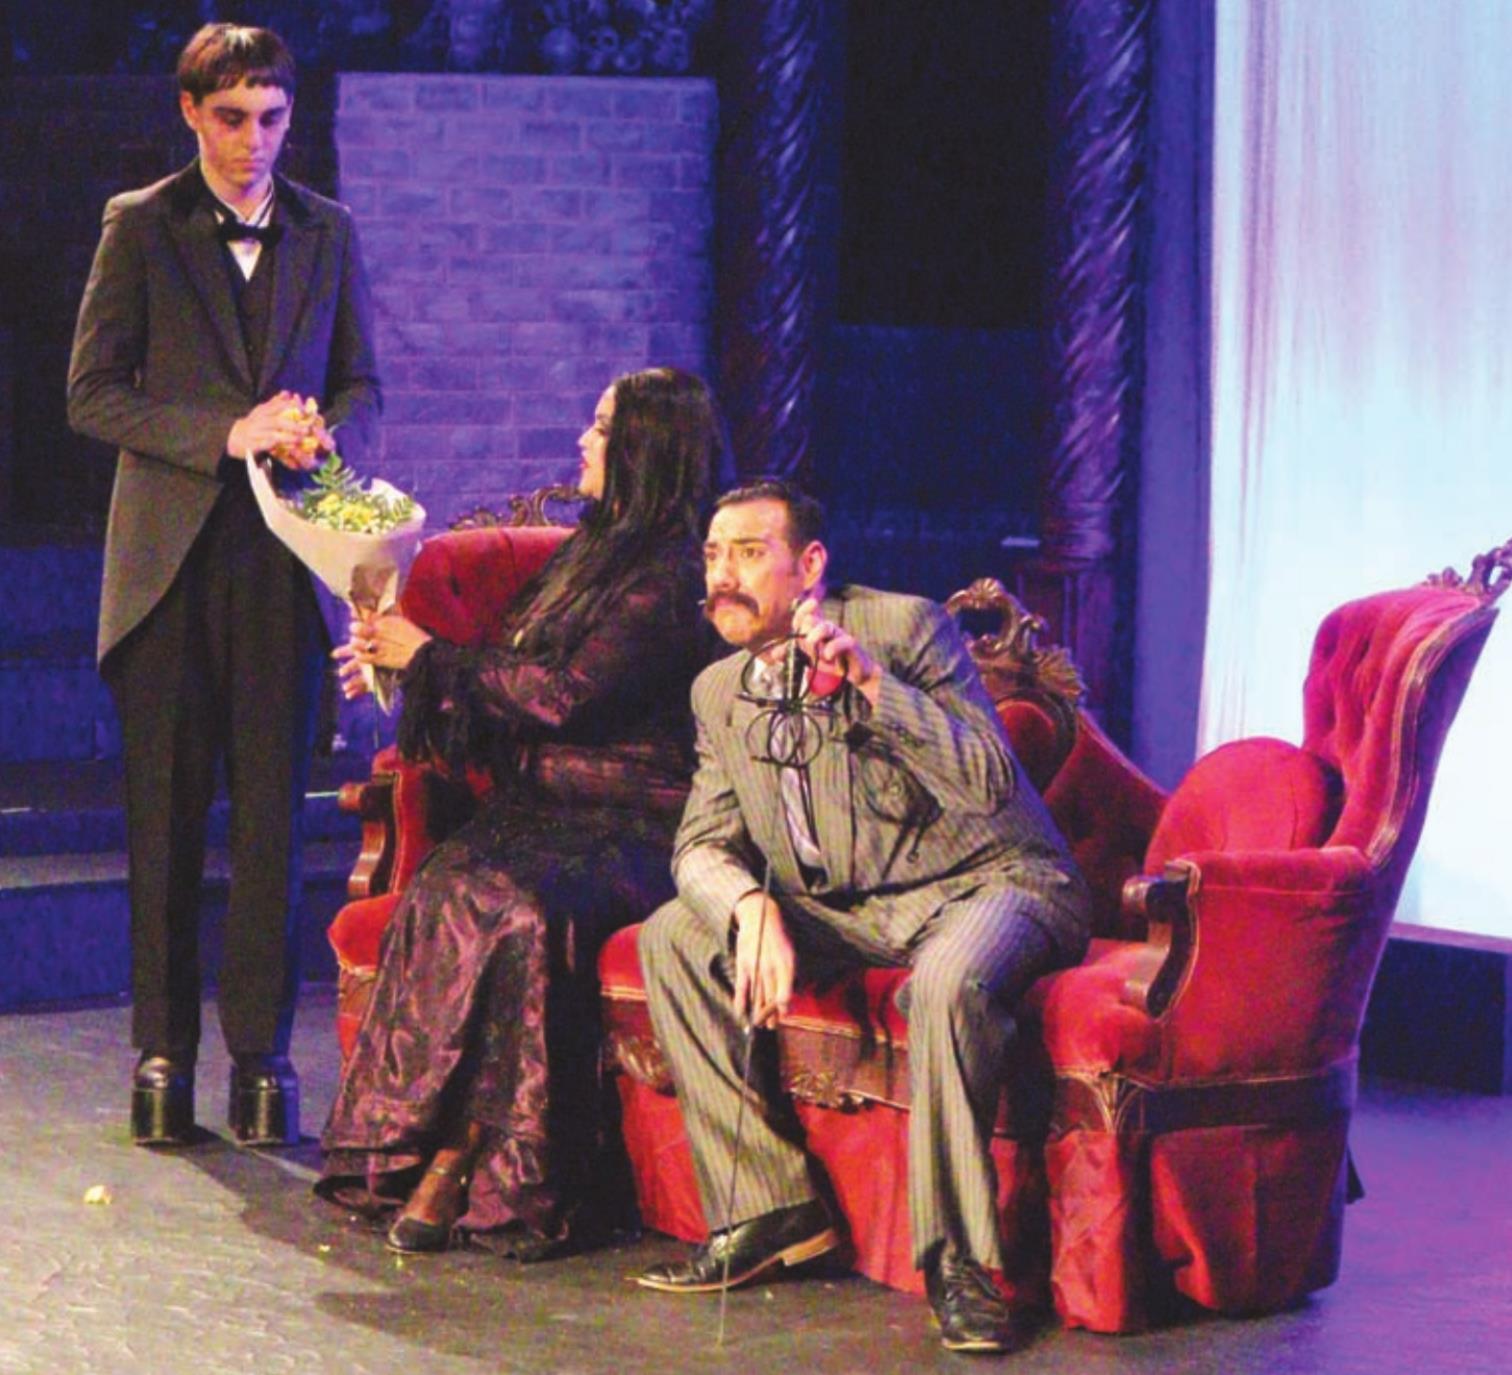 Morticia and Gomez Addams, played by Blair Barnett Foley and Oscar Hernandez, examine a bouquet of the dreadfully cheerful flowers. Also pictured is the Addams’ butler, Lurch, played by Gavin Houck. Leanna Cook/WDN